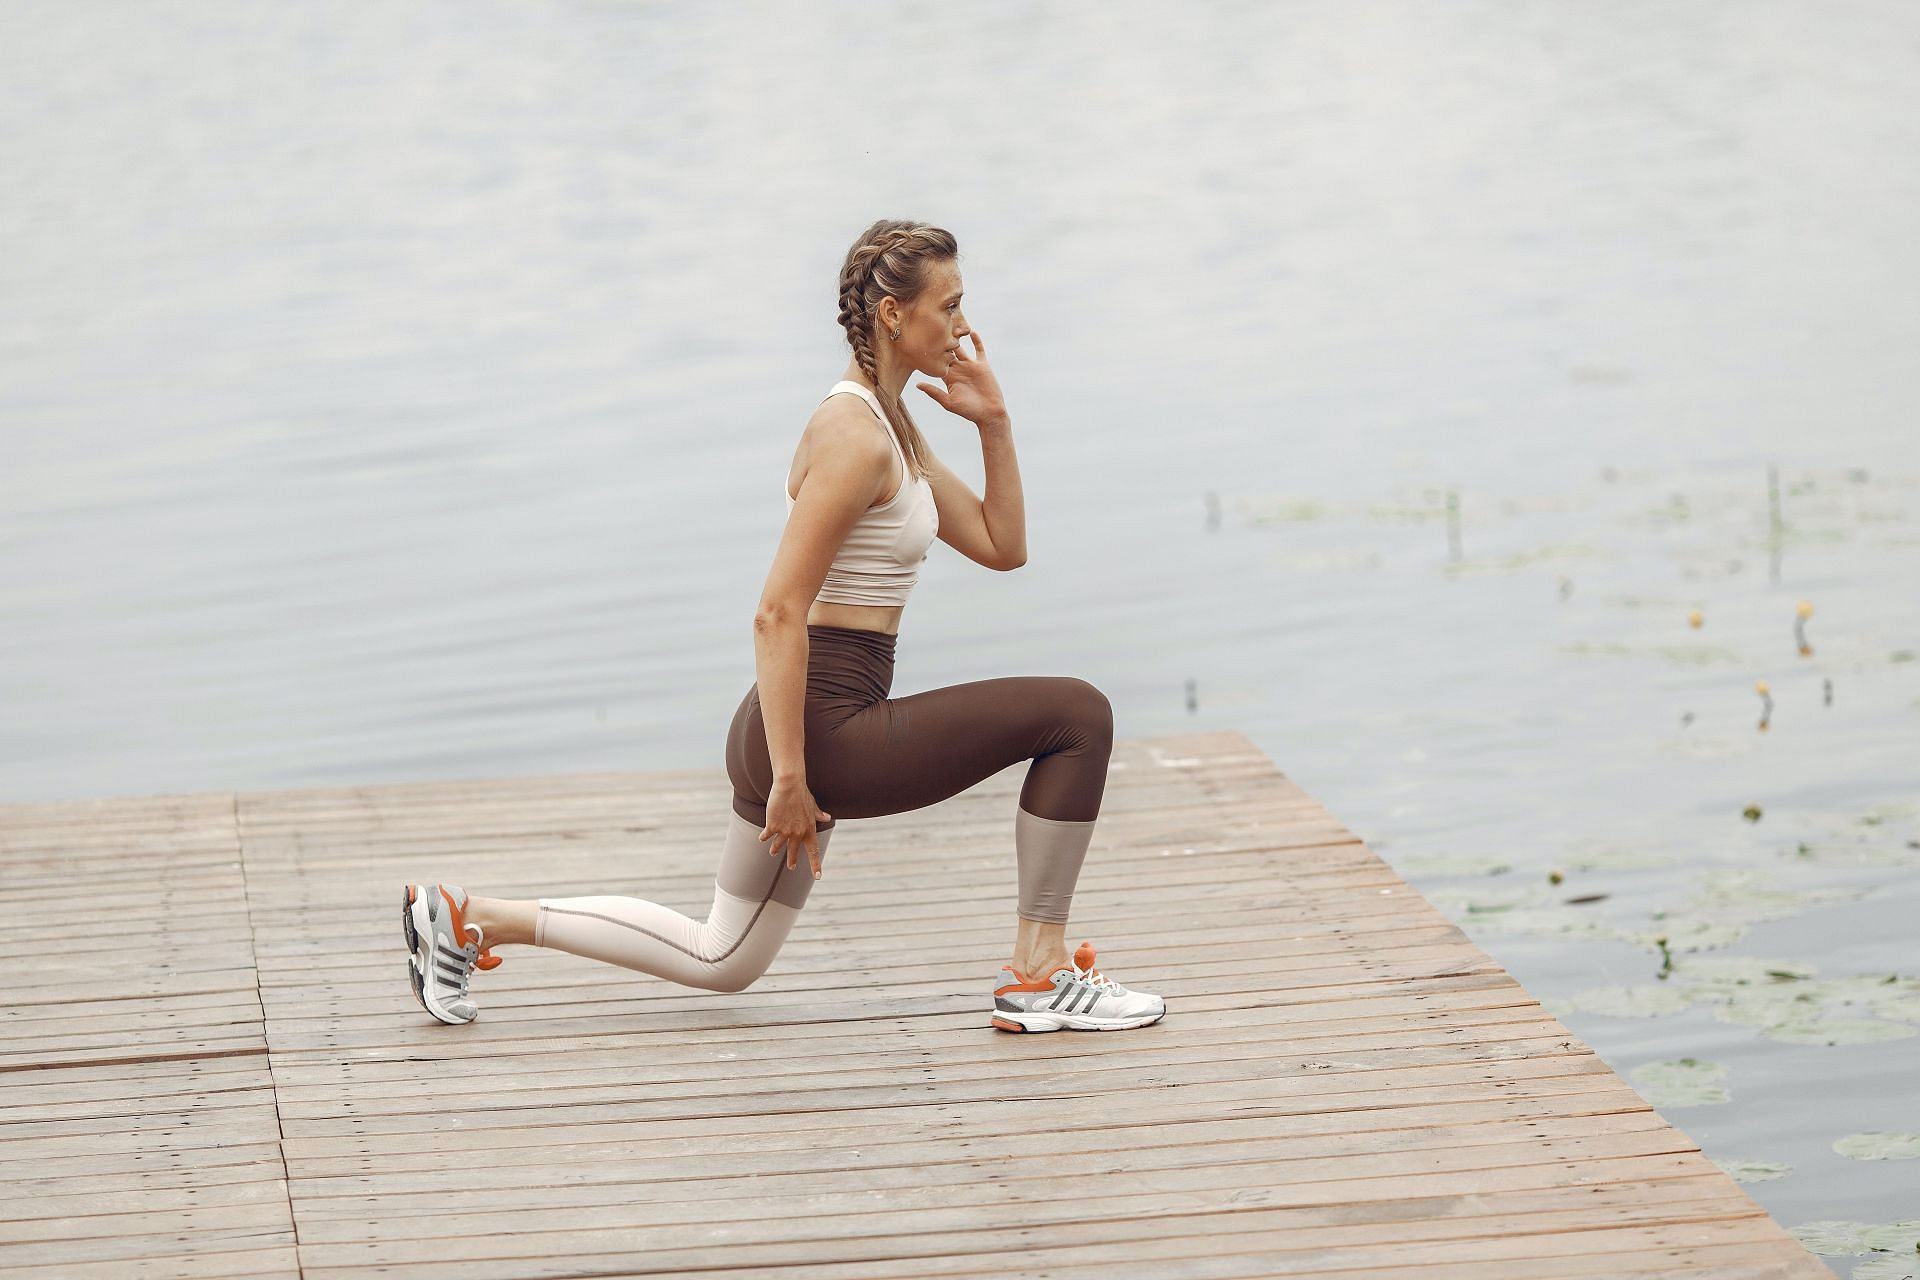 Quads are the muscles at the top of your thighs, which allow you to sit, walk, run, stand up and perform other daily activities (Image via Pexels @Gustavo Fring)